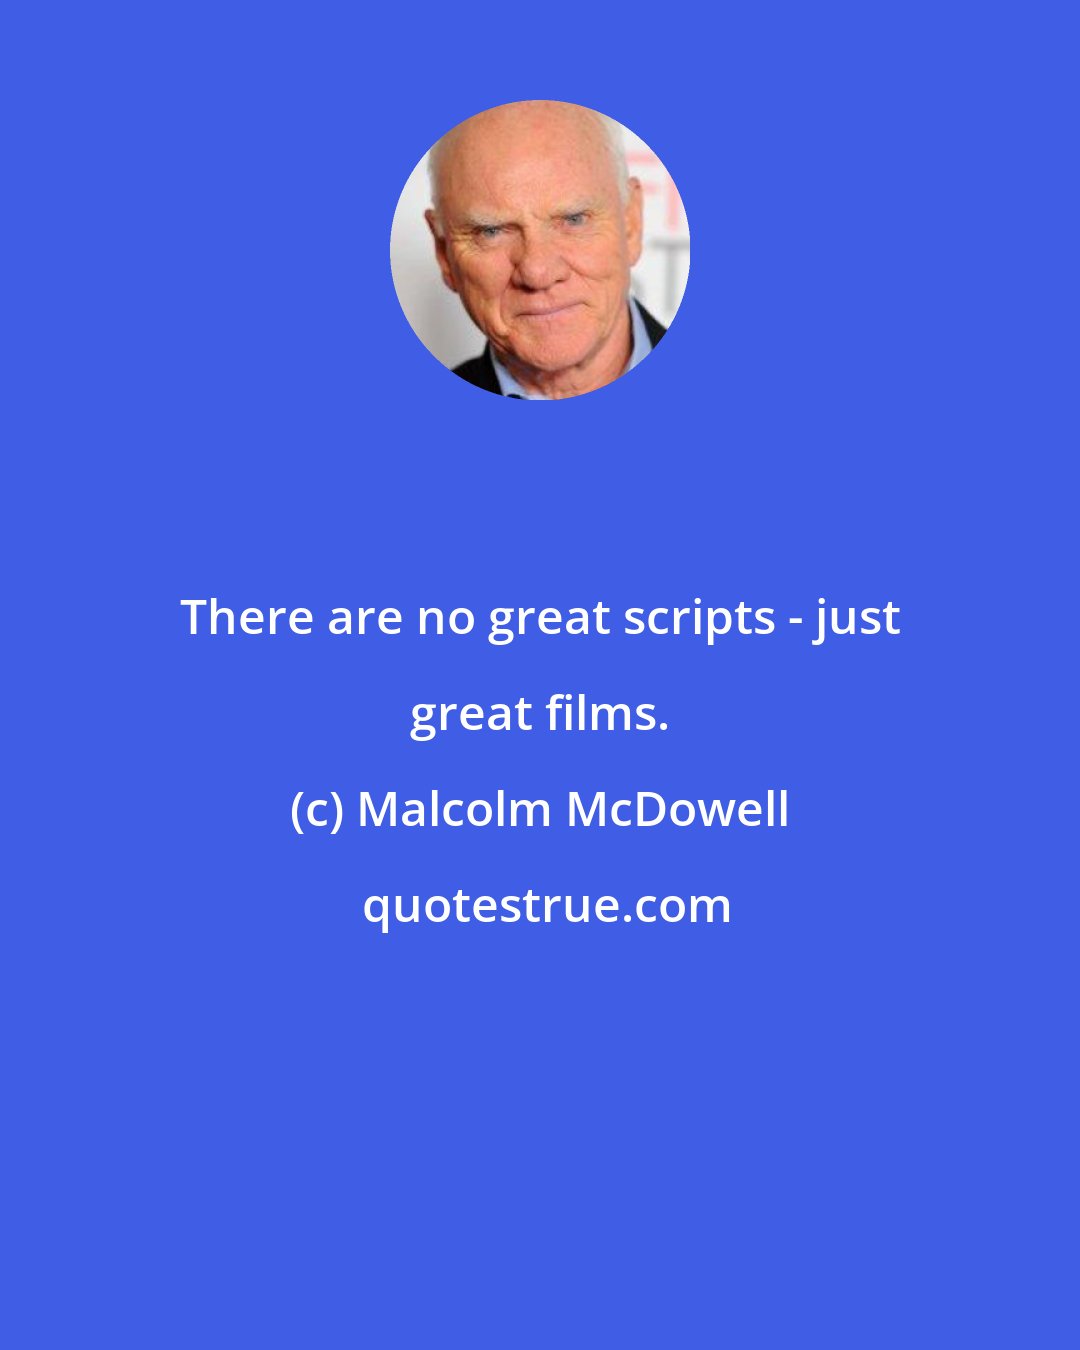 Malcolm McDowell: There are no great scripts - just great films.